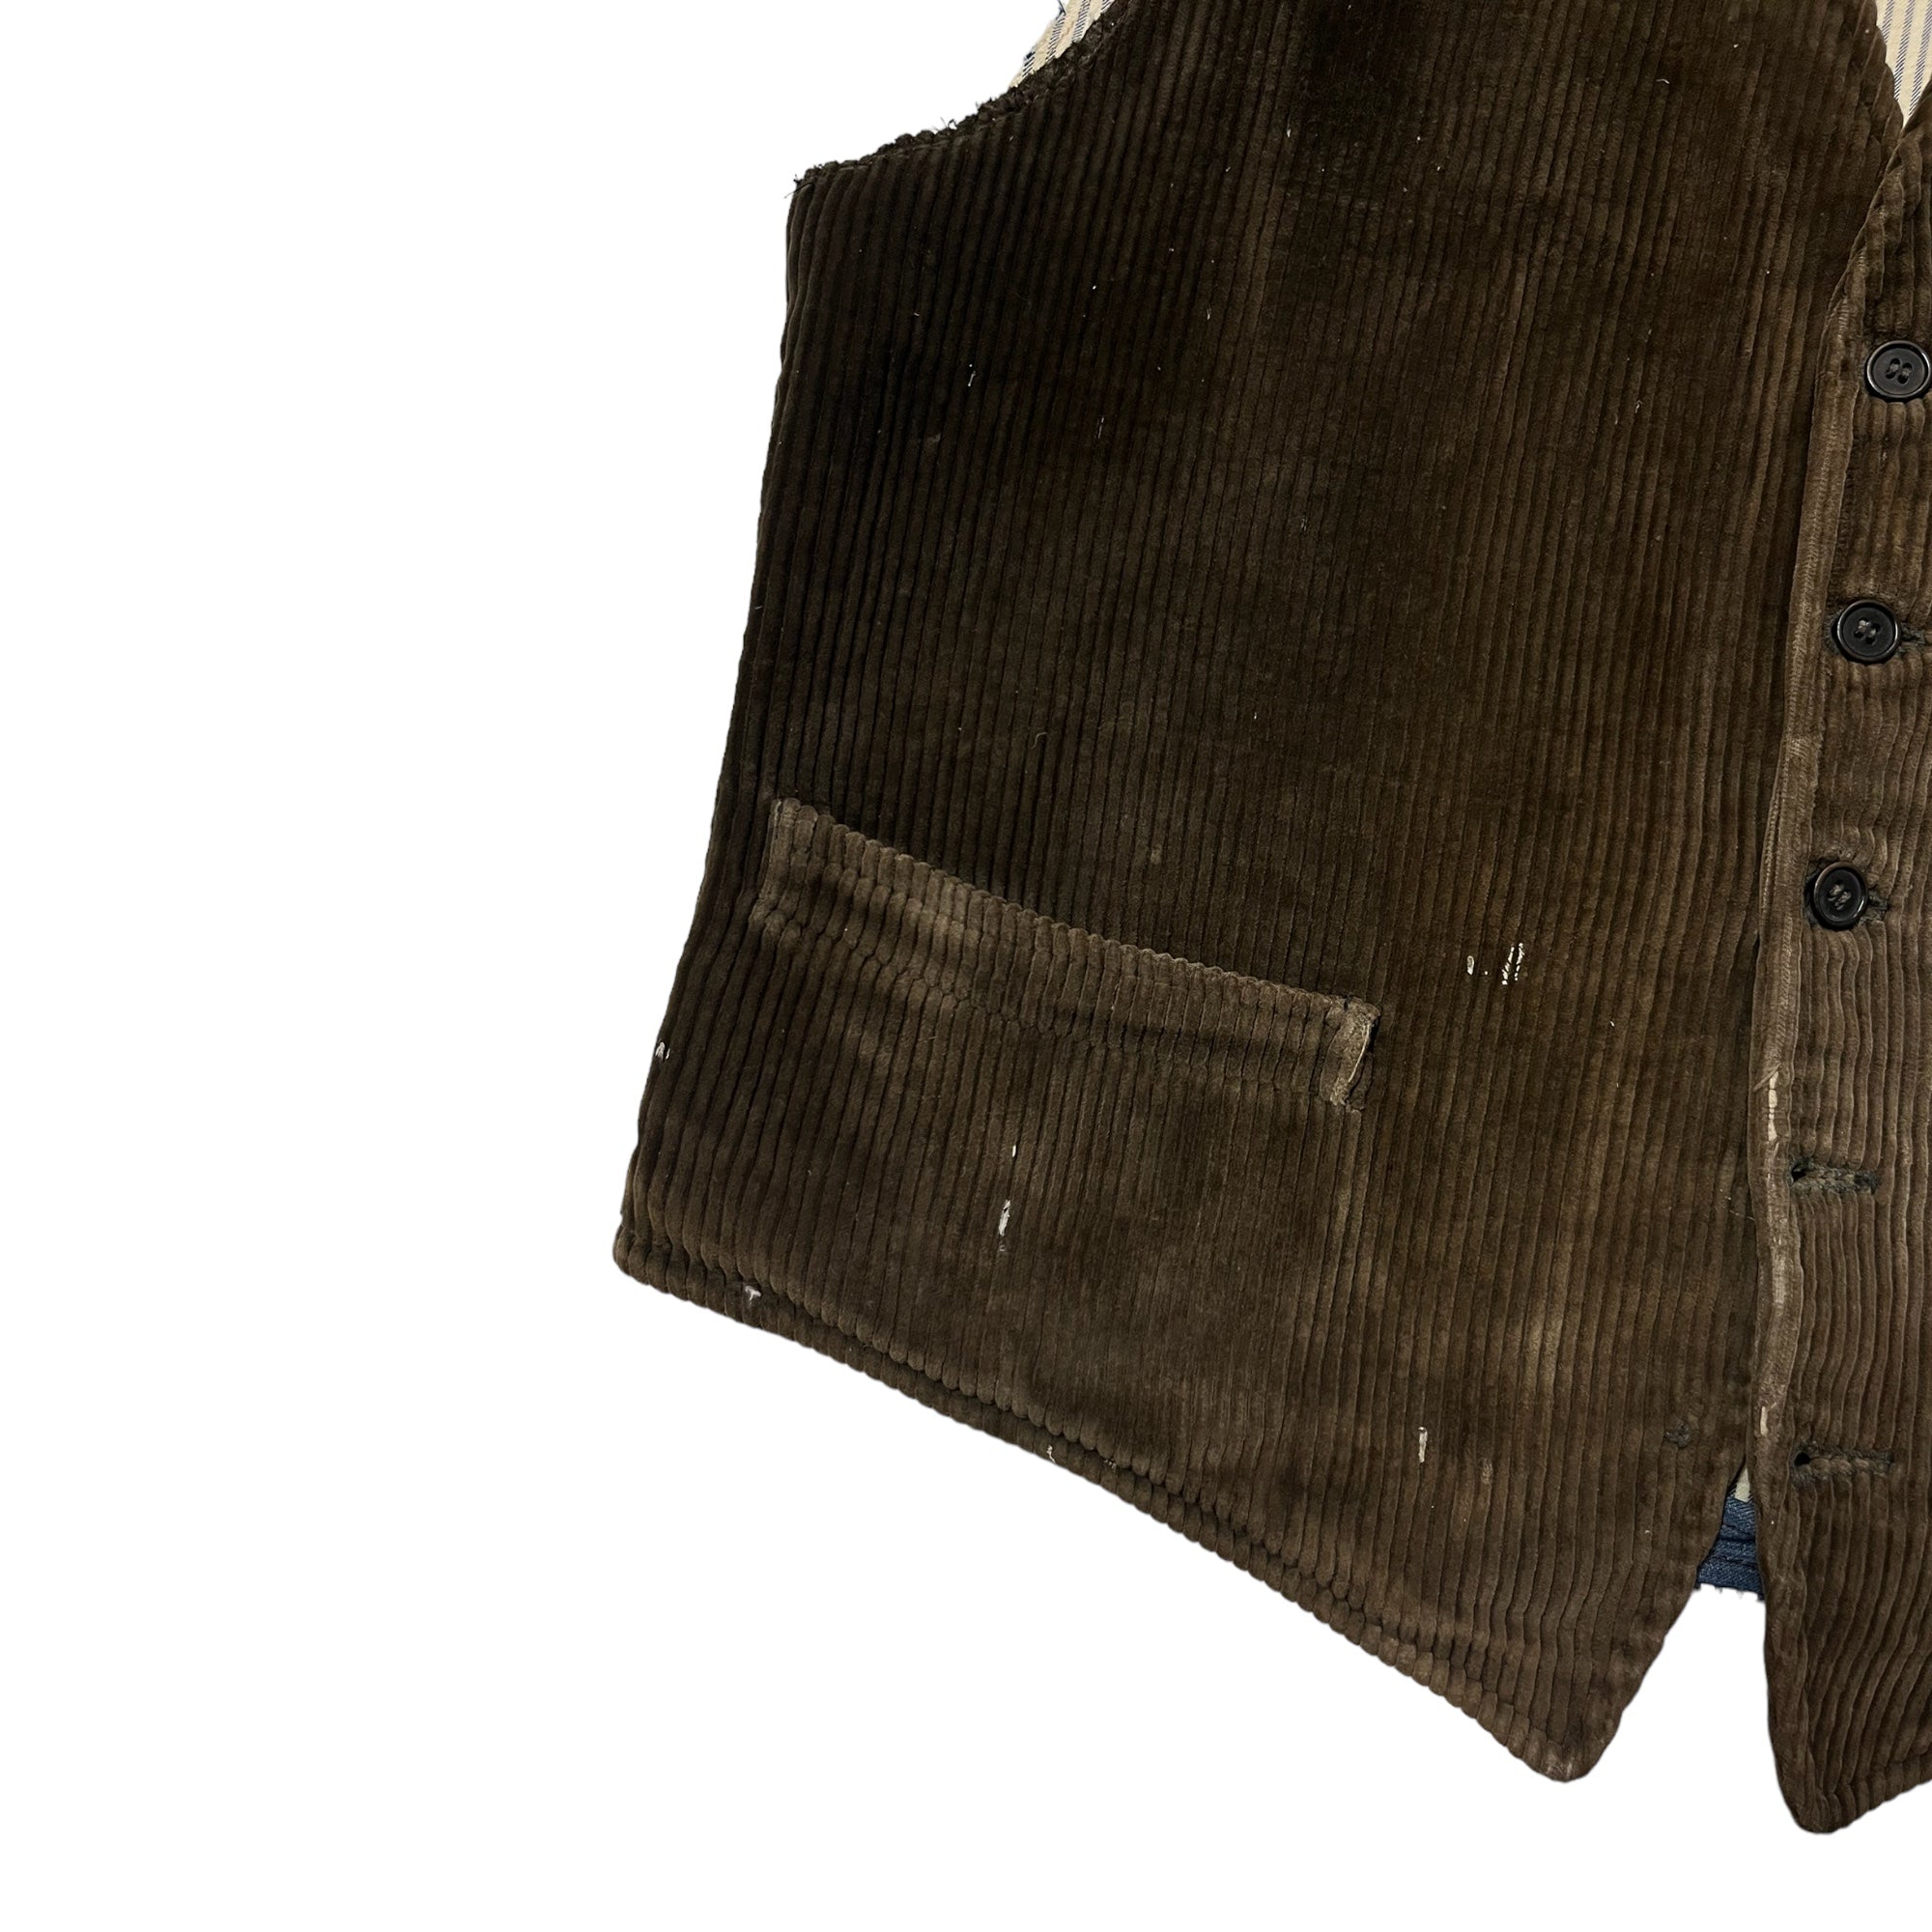 1920s/30s French Corduroy Vest with Replaced ‘Napkin’ Back - Coffee Brown -  S